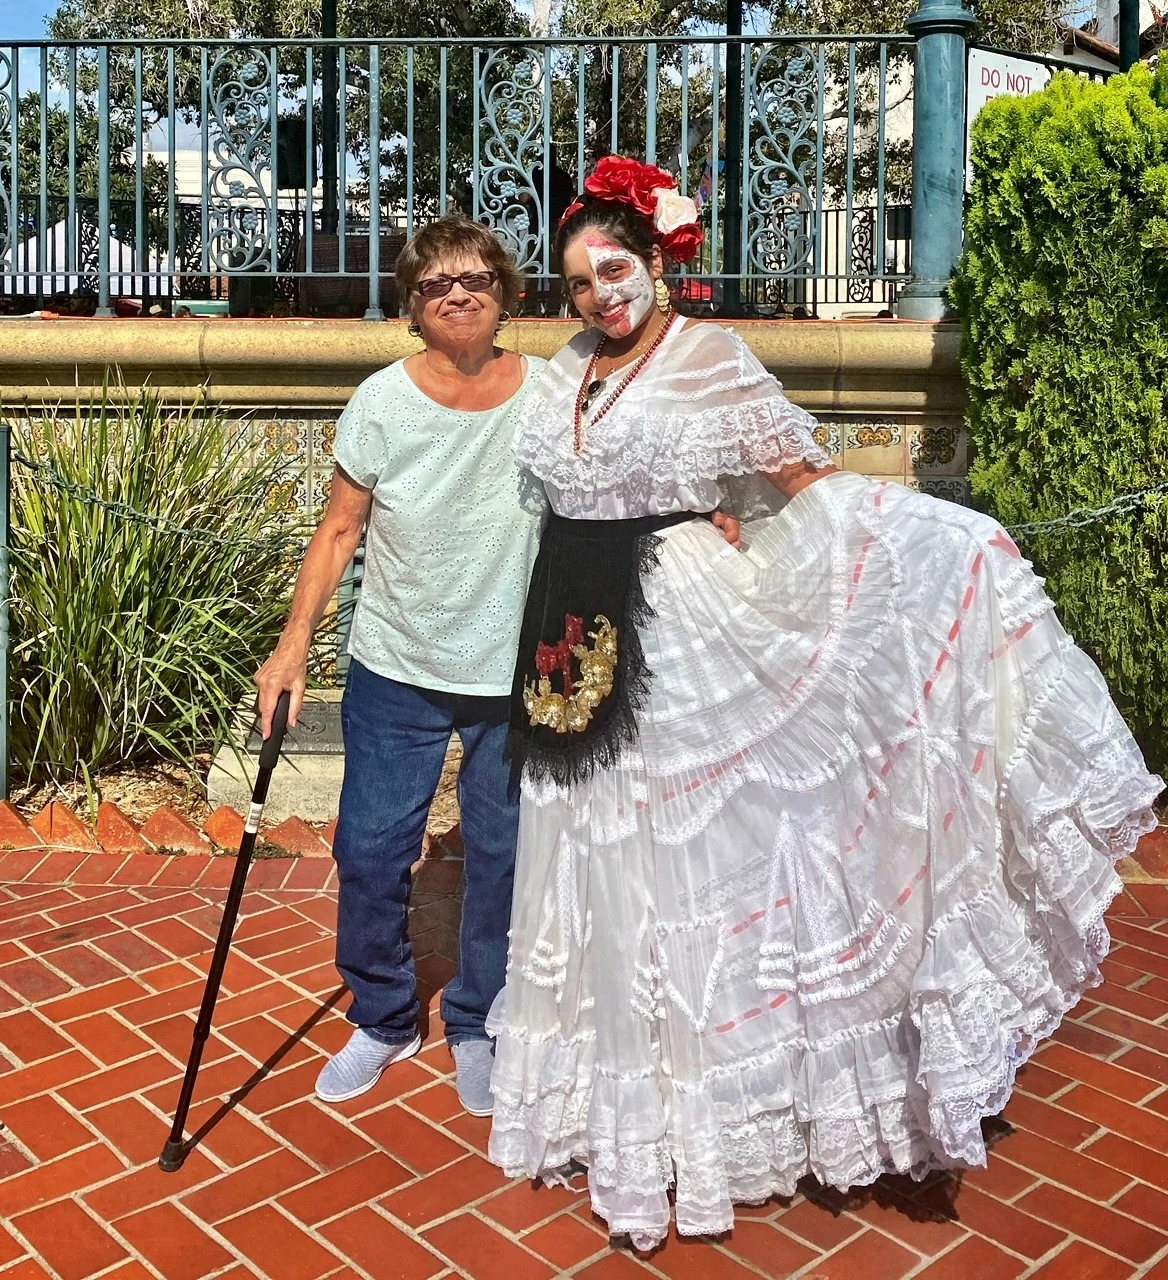 At Senior Helpers, we have a tradition of celebrating Hispanic Heritage Month with our favorite Senior and Folklorico Dancer. This weekend, we celebrated at the world-famous Olvera St, in Los Angeles.